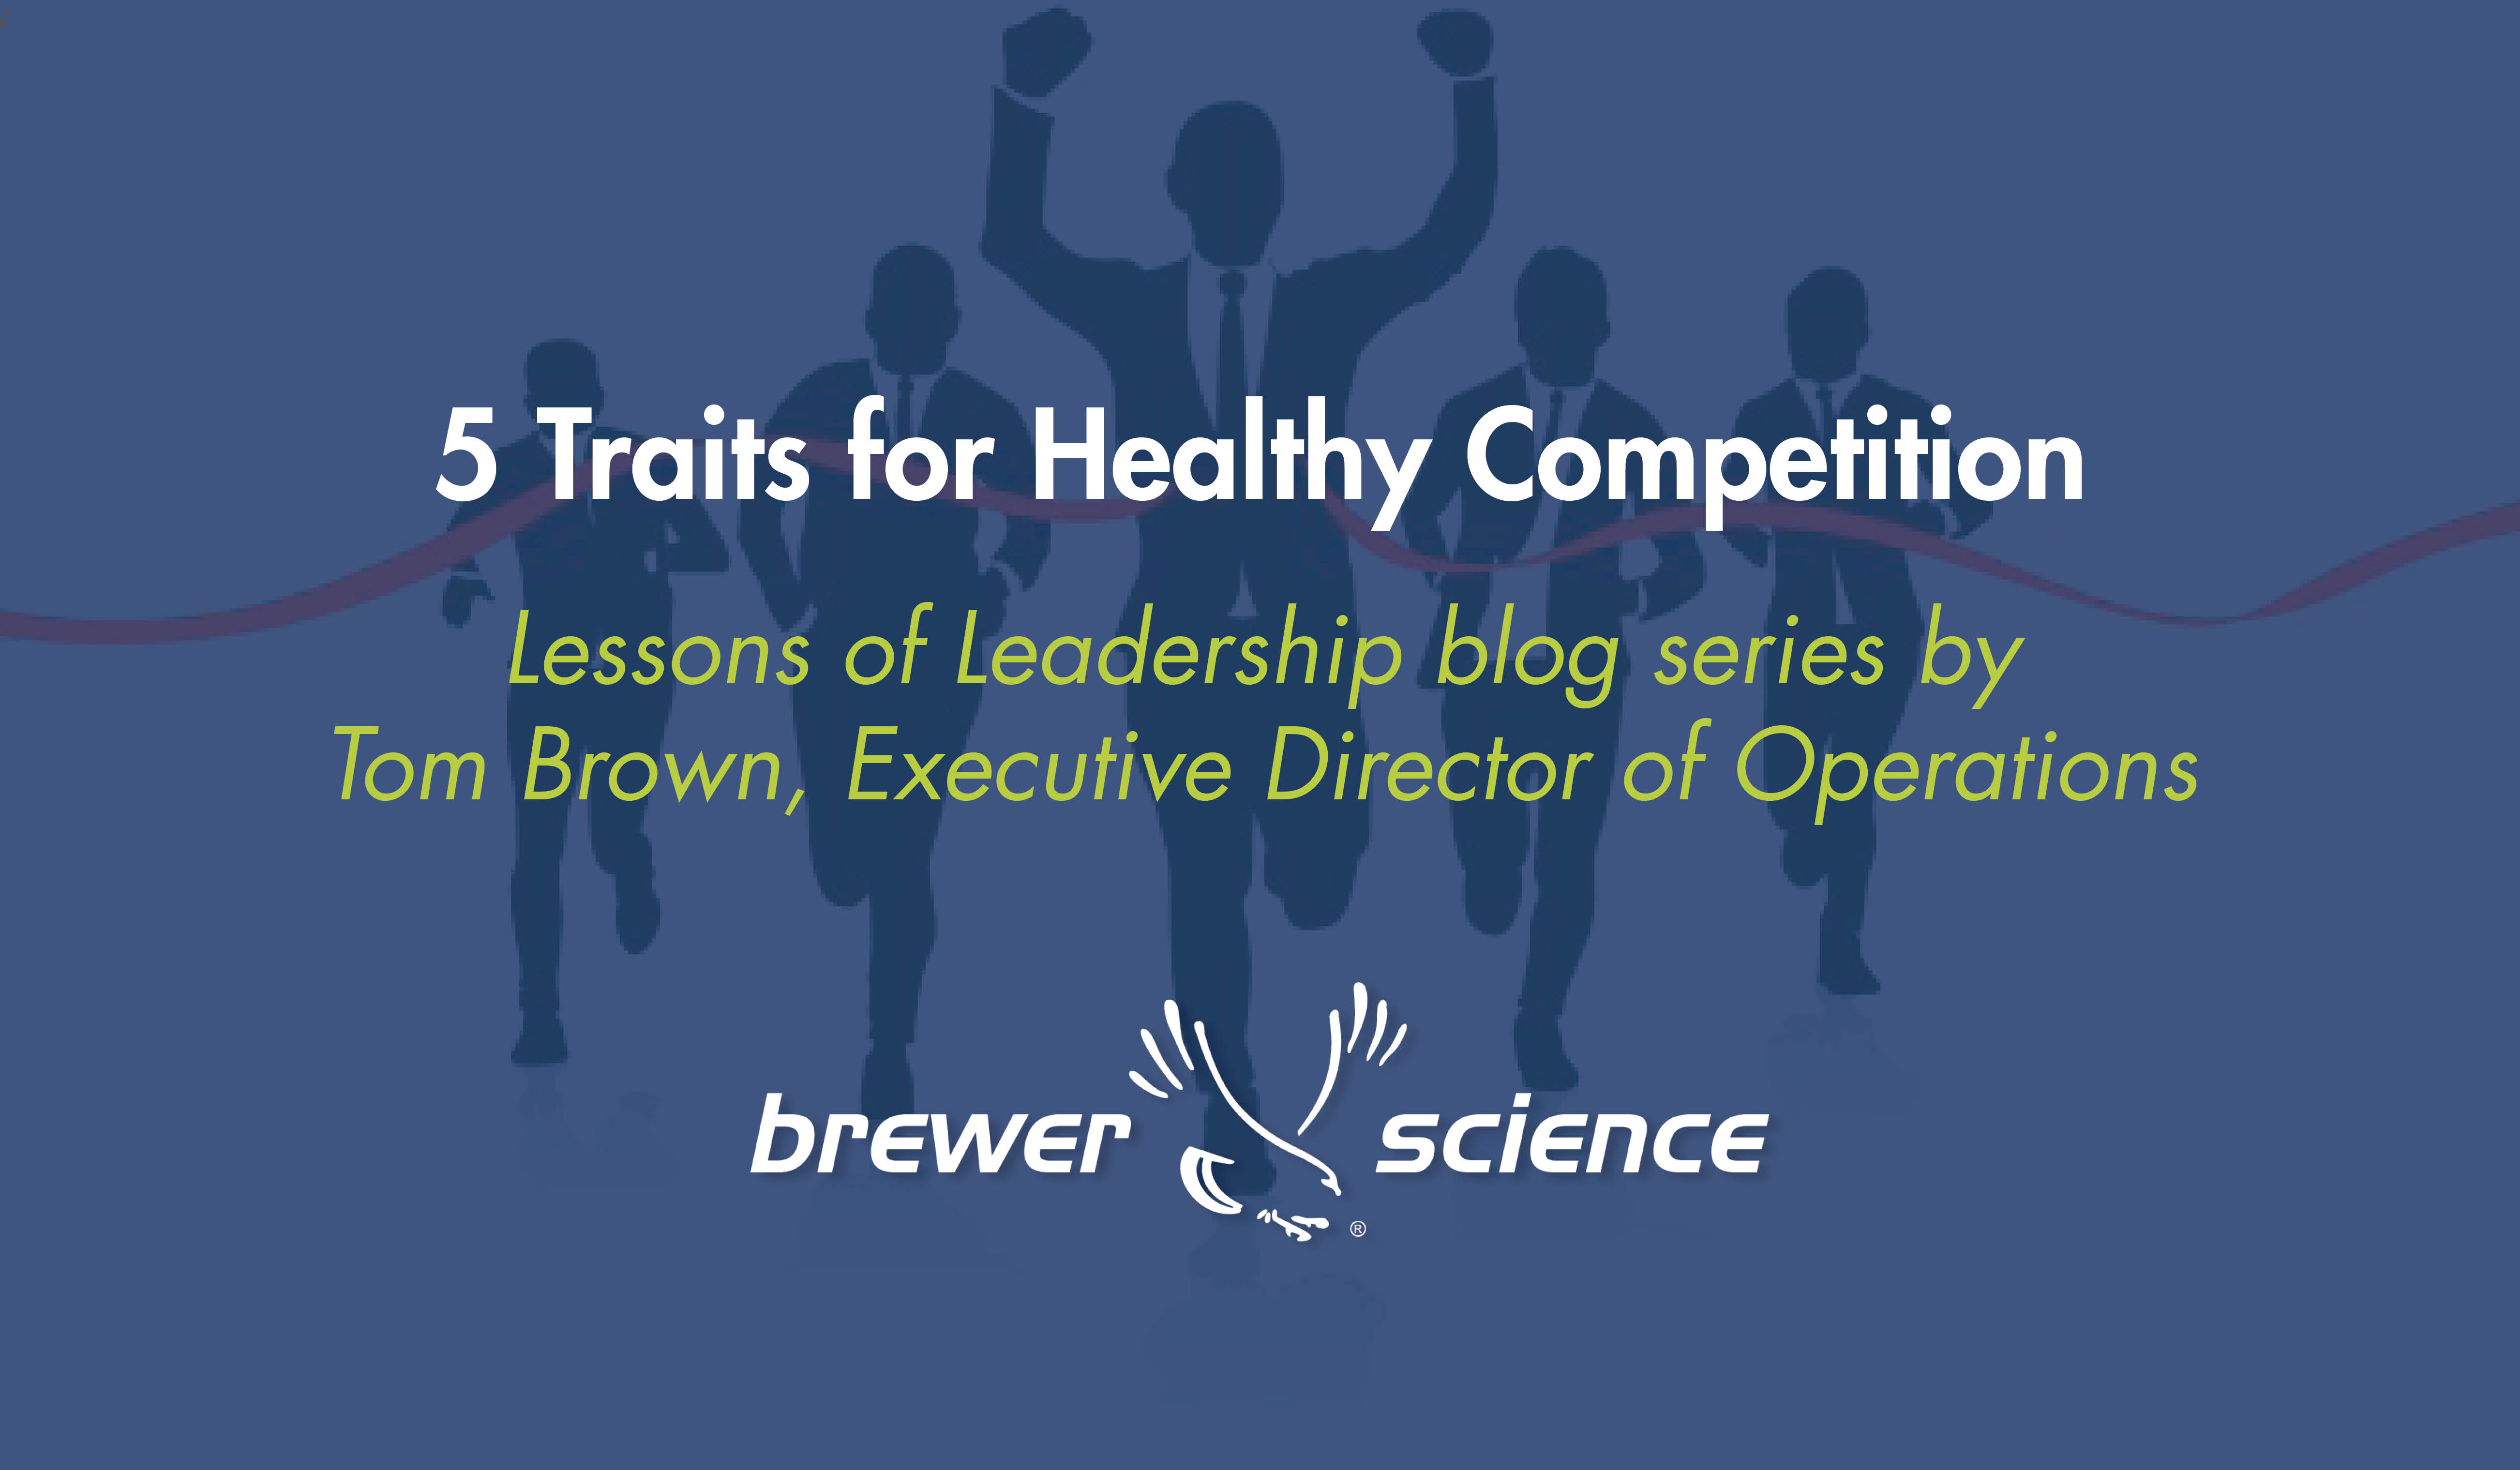 5 Traits for Healthy Competition